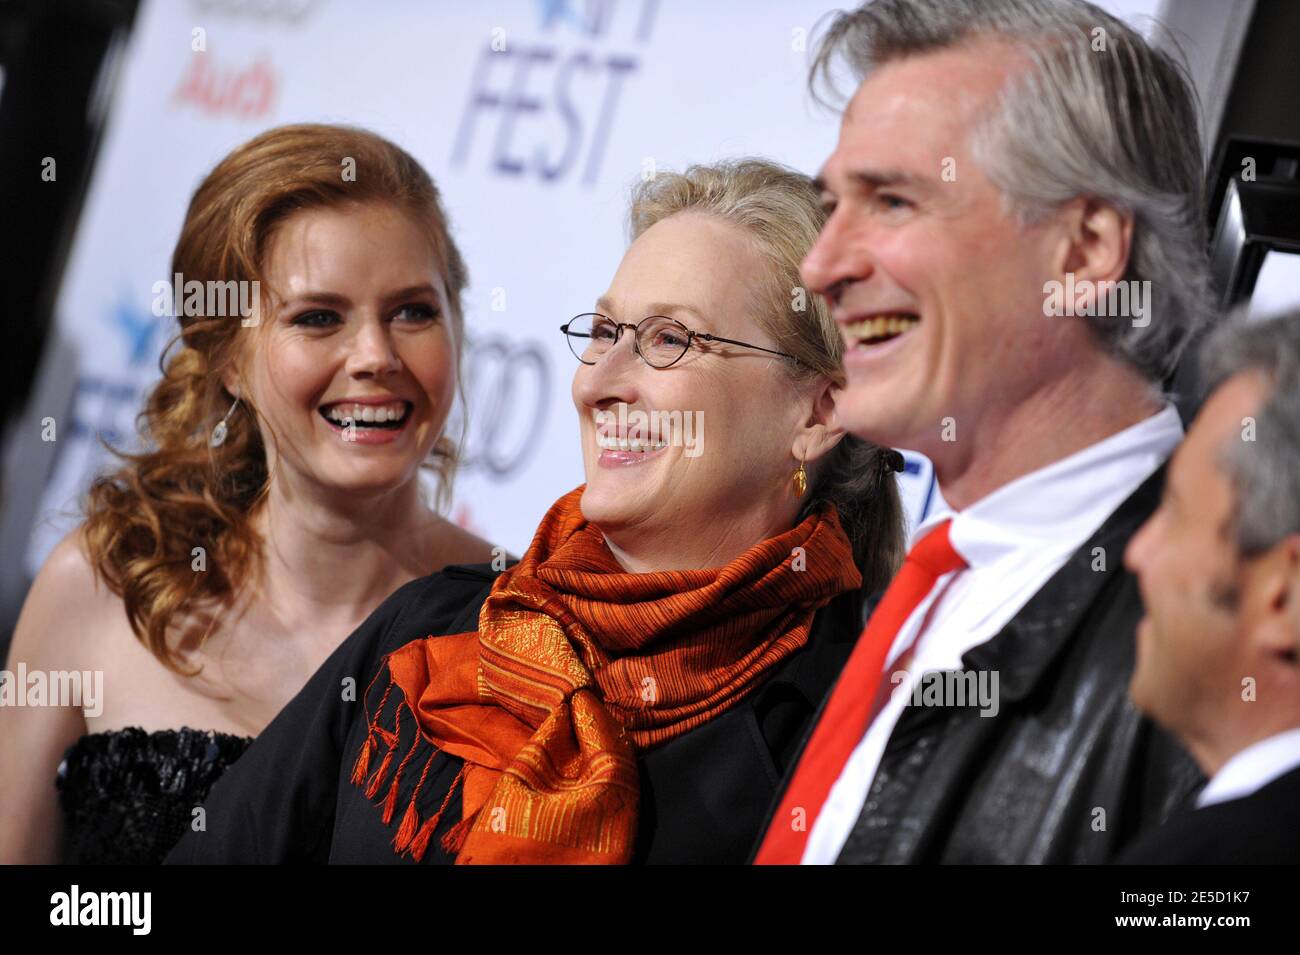 Meryl Streep, Amy Adams and John Patrick Shanley attend the AFI Fest Opening Night Gala Presentation of 'Doubt' held at the Arclight Cinemas in Hollywood, Los Angeles, CA, USA on October 30, 2008. Photo by Lionel Hahn/ABACAPRESS.COM Stock Photo